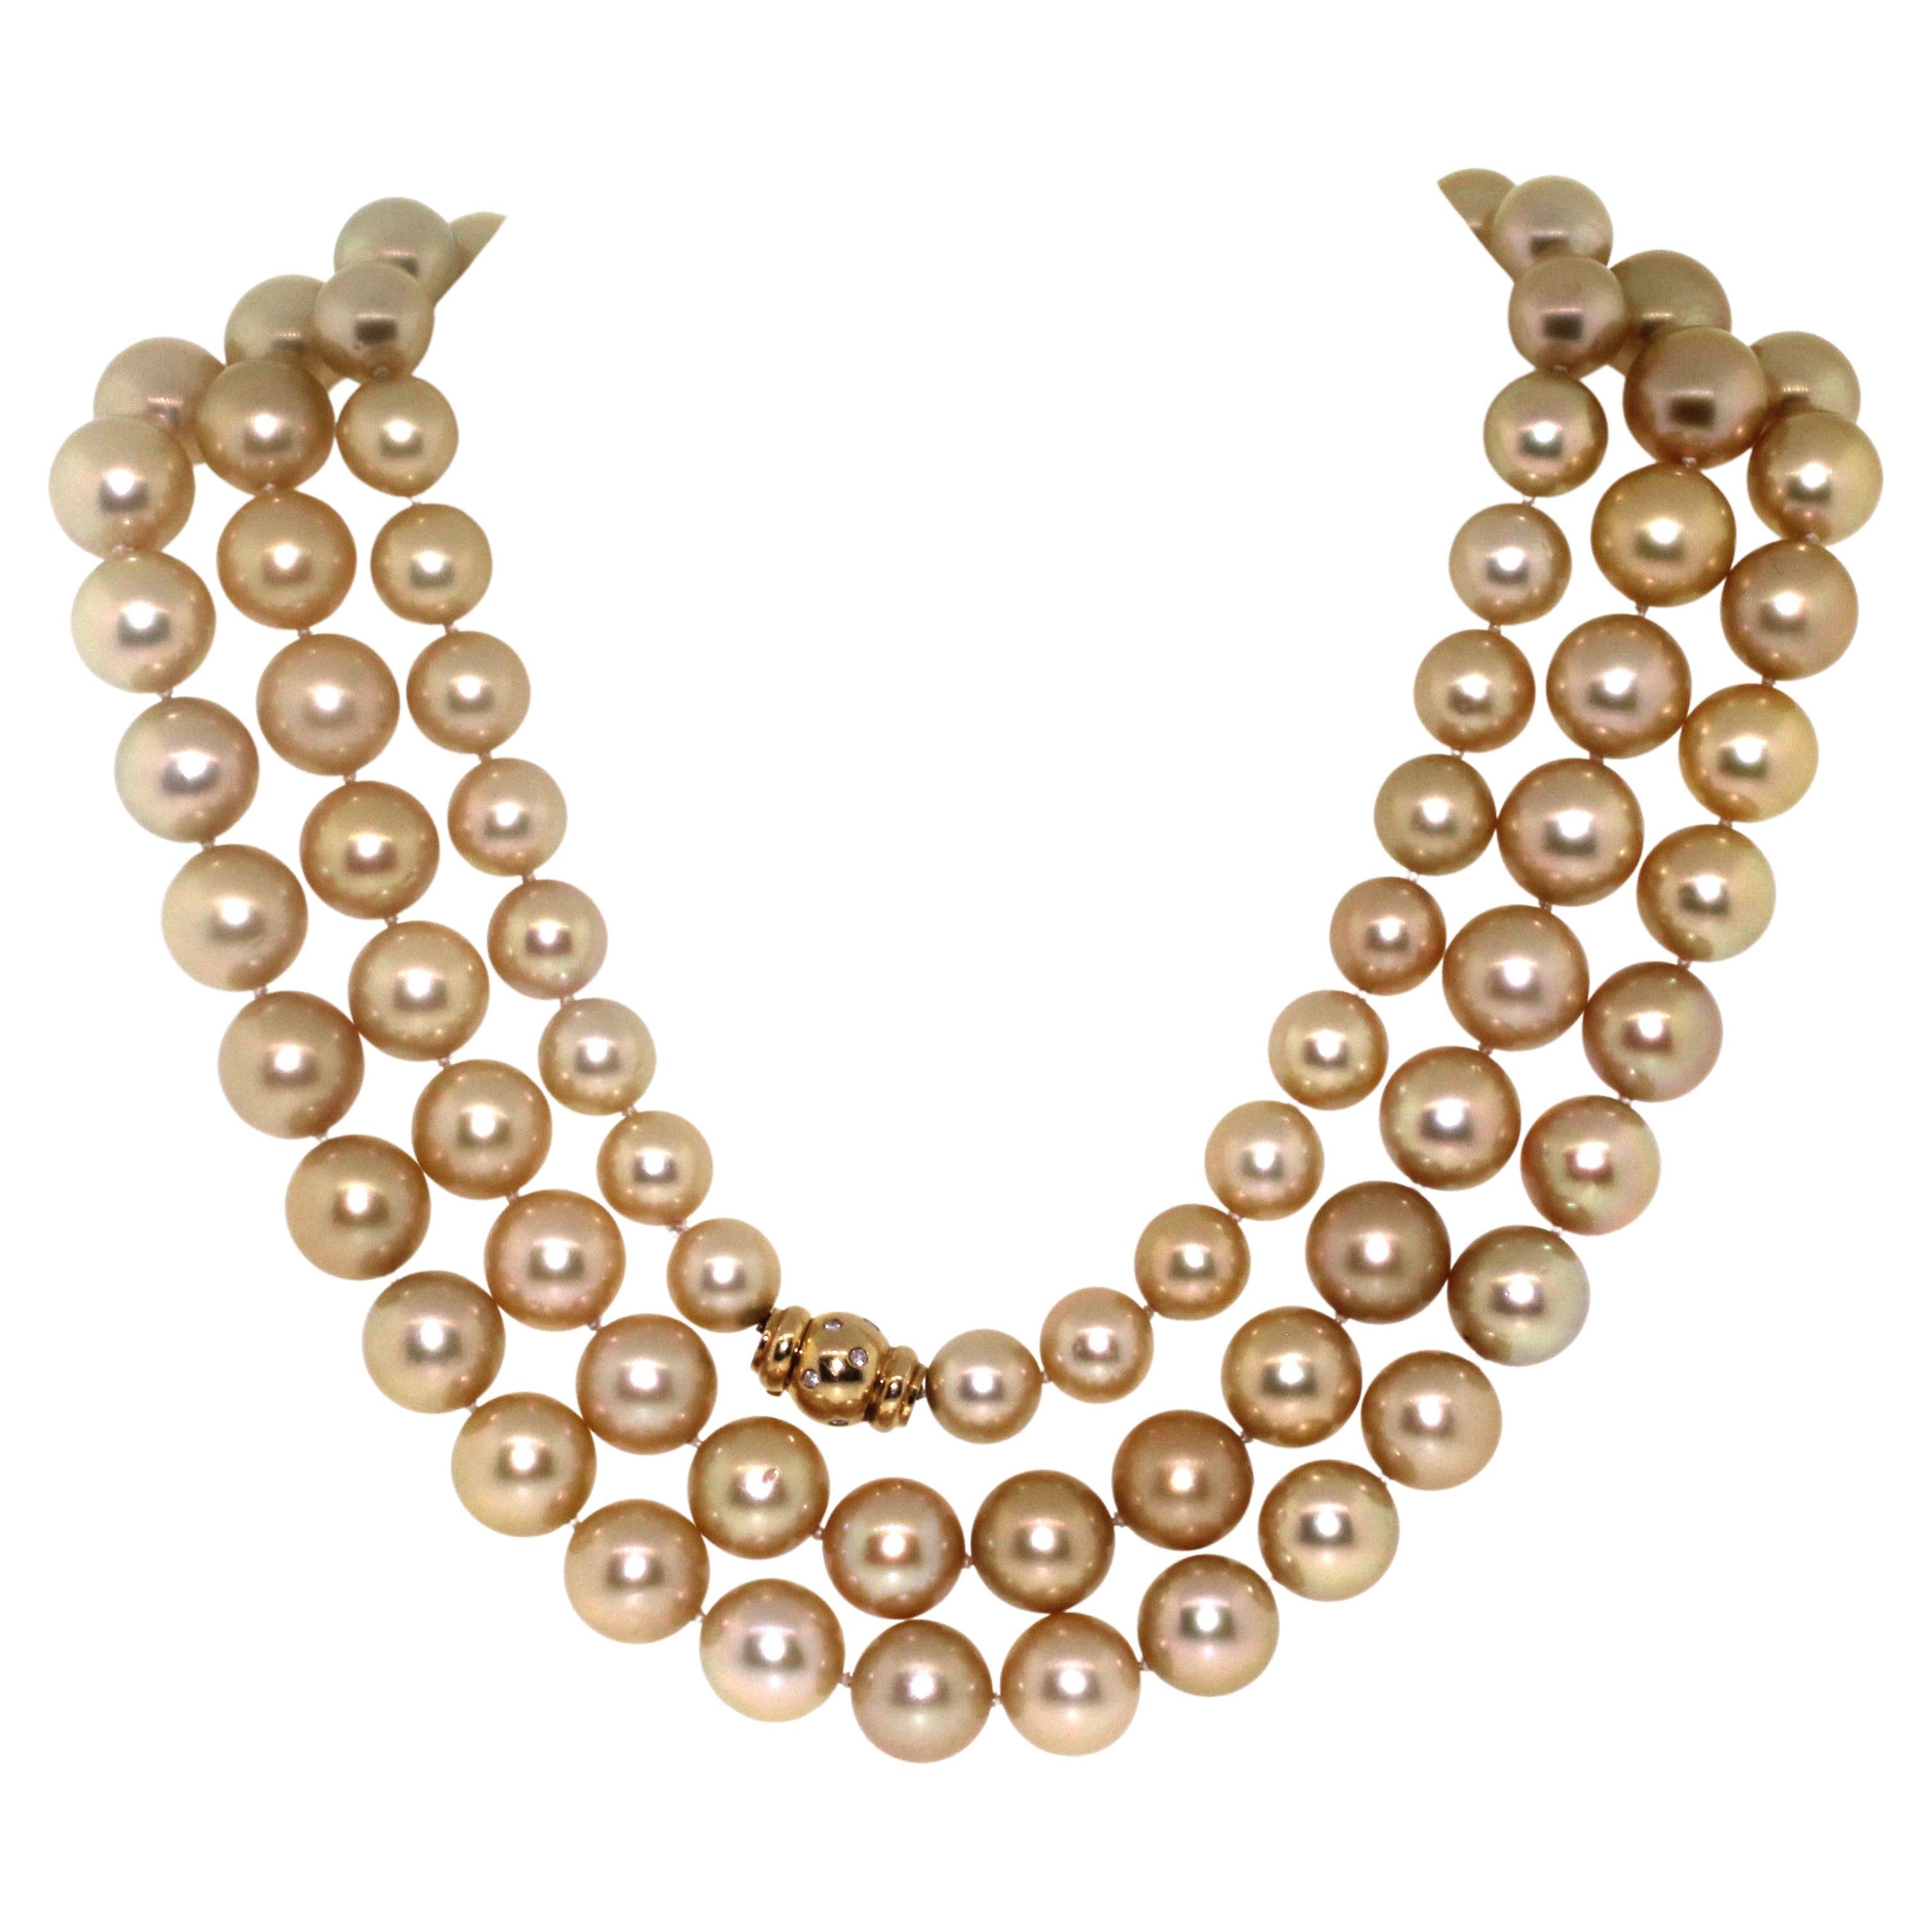 Hakimoto By Jewel Of Ocean
Suggested Redtail Price $100,000
99 Golden South Sea Pearl 10x14mm Rope Necklace 18K Diamonds Yellow Gold Clasp
50.5